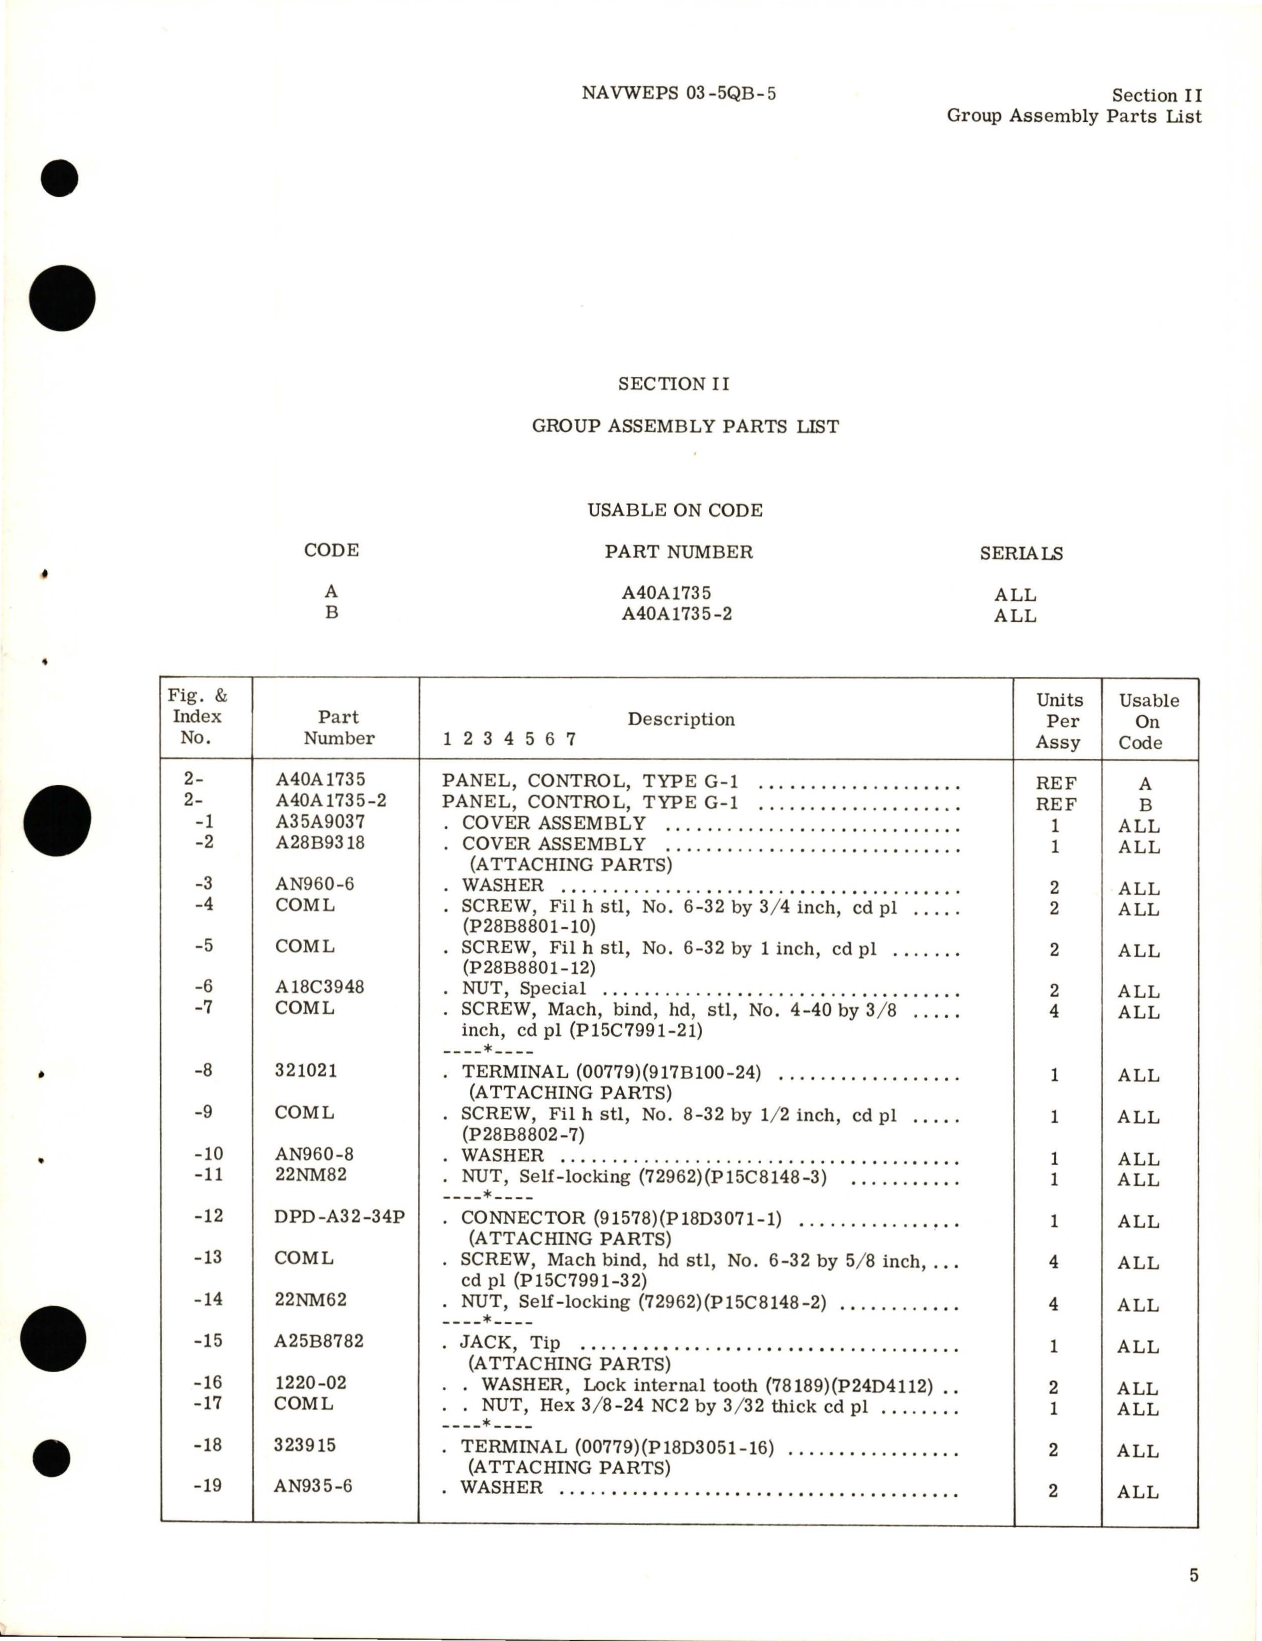 Sample page 7 from AirCorps Library document: Illustrated Parts Breakdown for A-C Control Panel - Part A40A1735-2